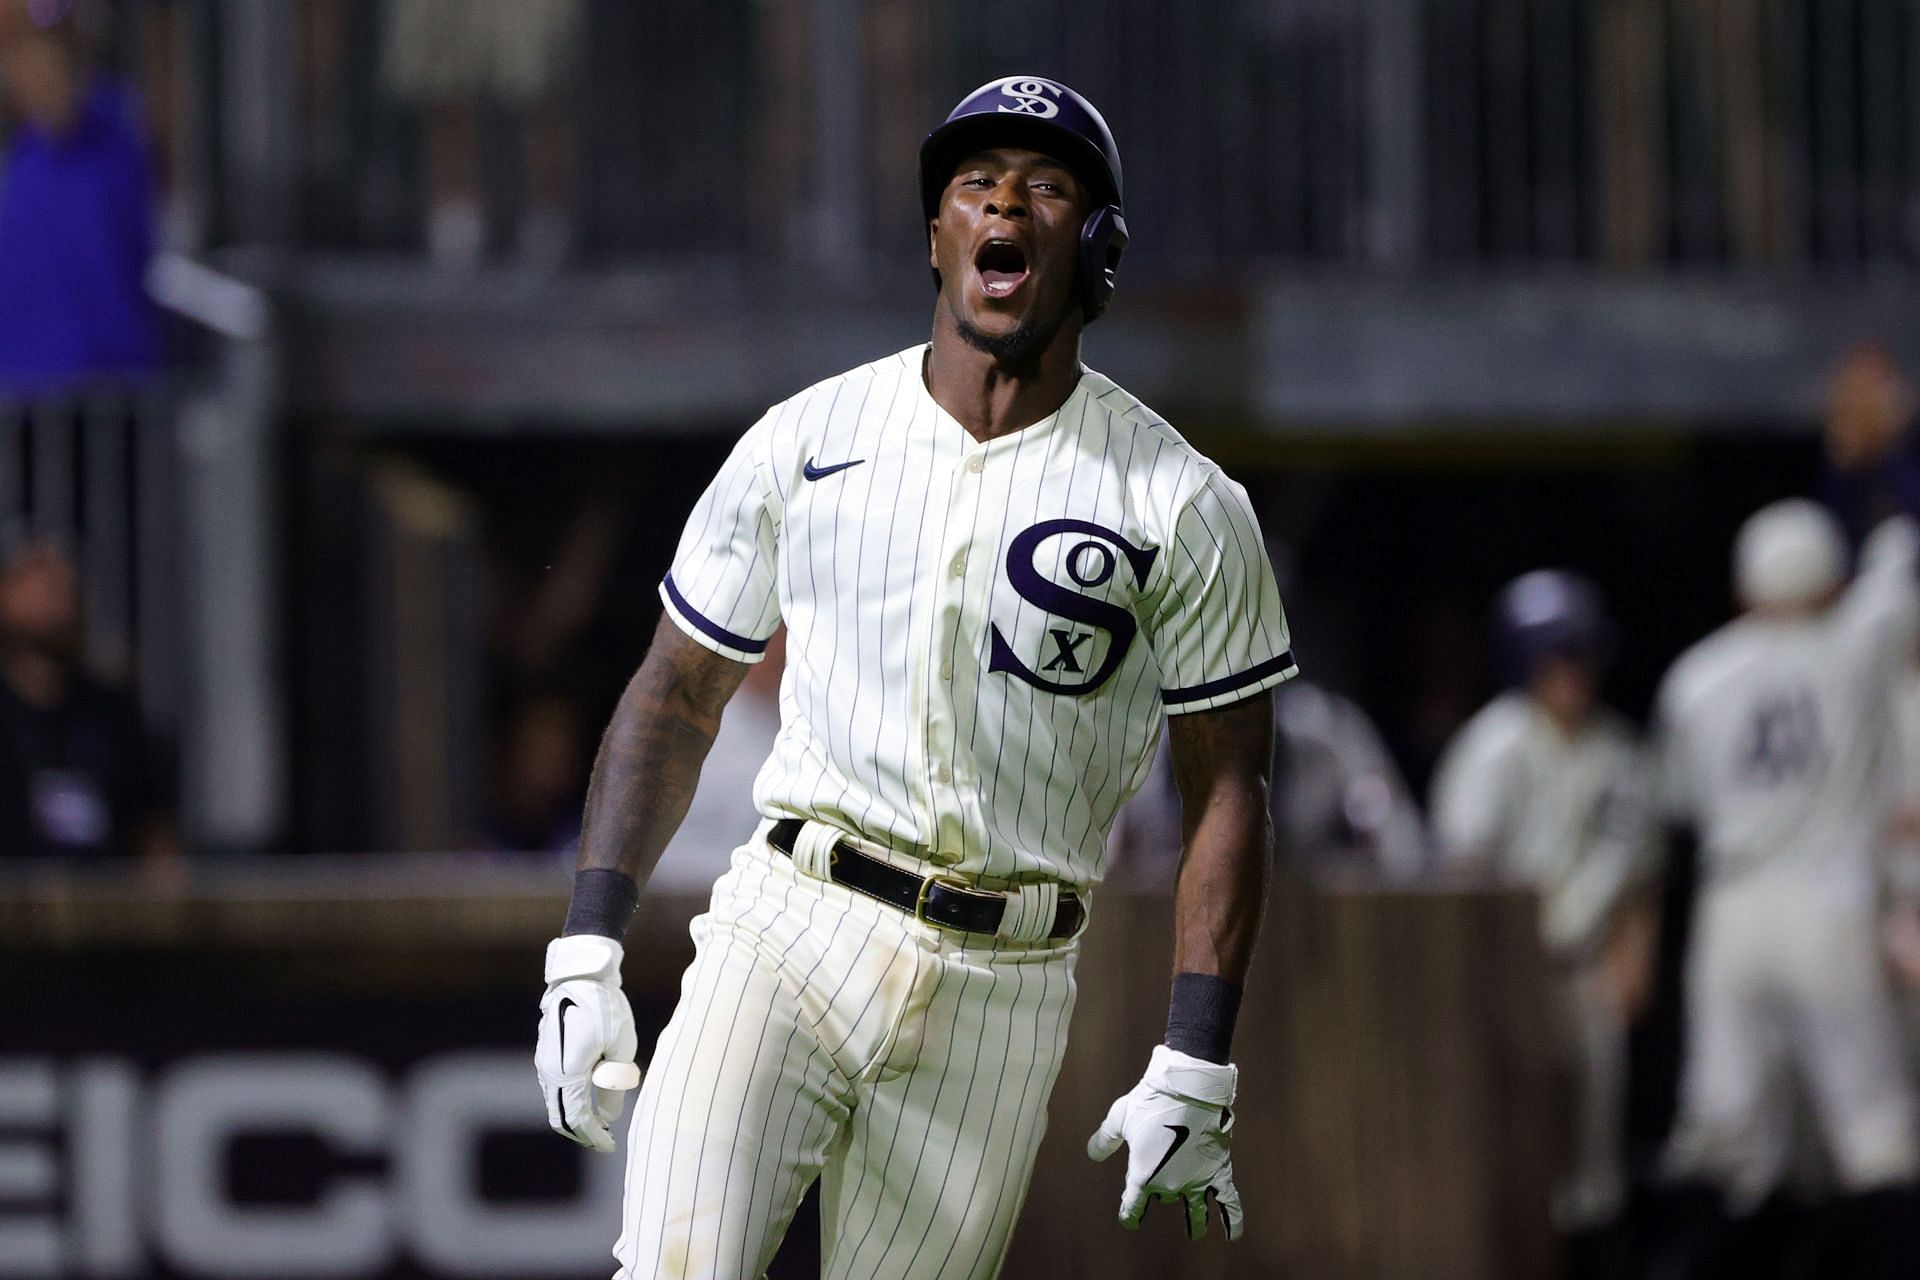 Tim Anderson after hitting the game winng home run